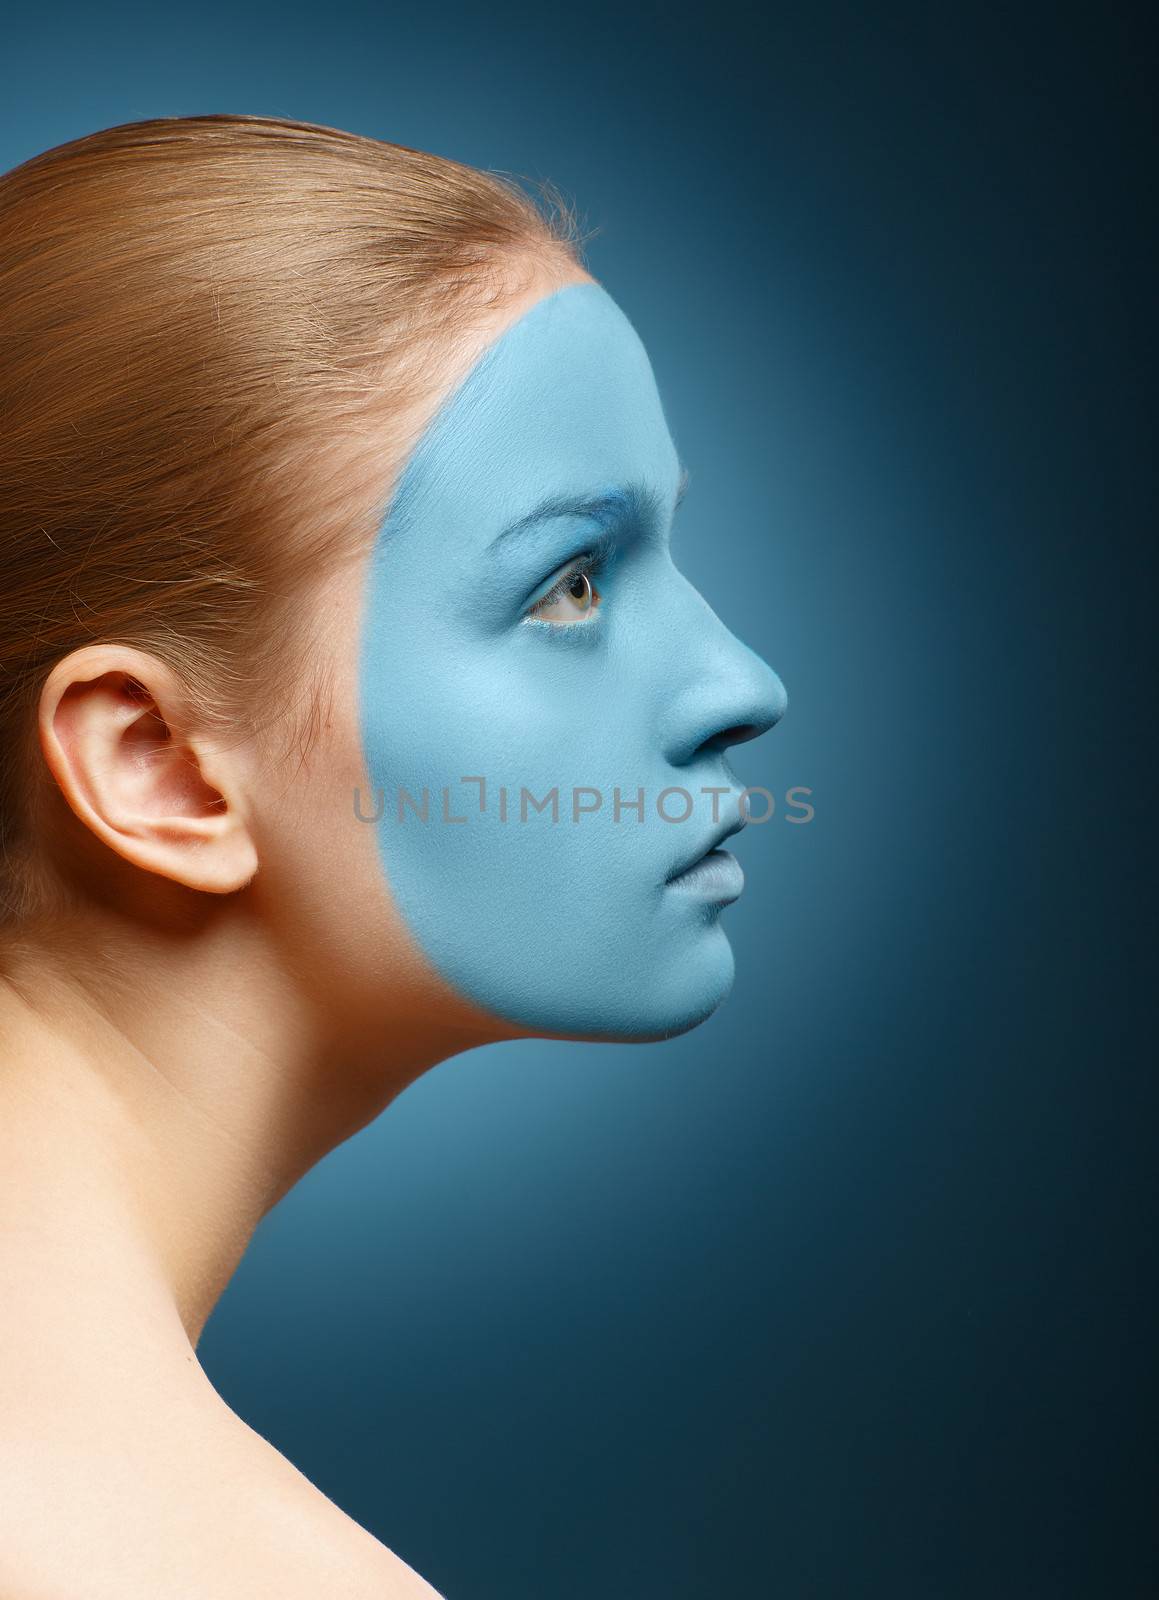 Young girl with facial mask. Medical or sports theme.